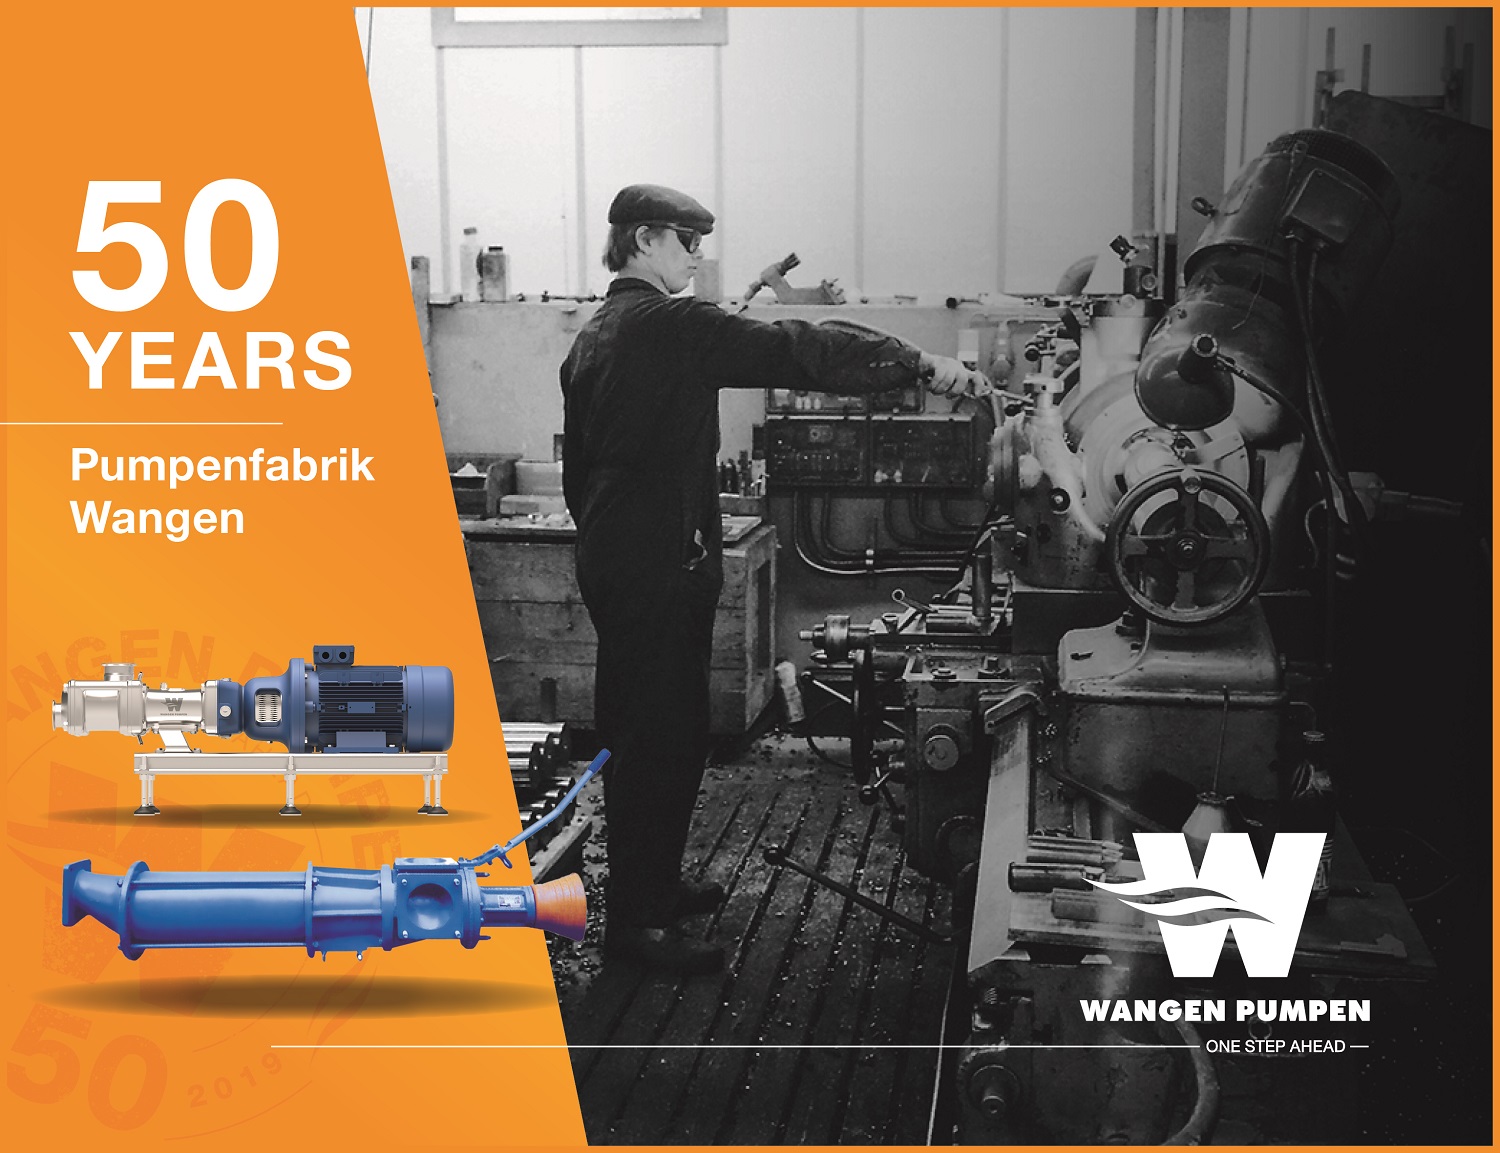 Wangen began as a small family business in the agricultural sector in 1969 and is now an international company.